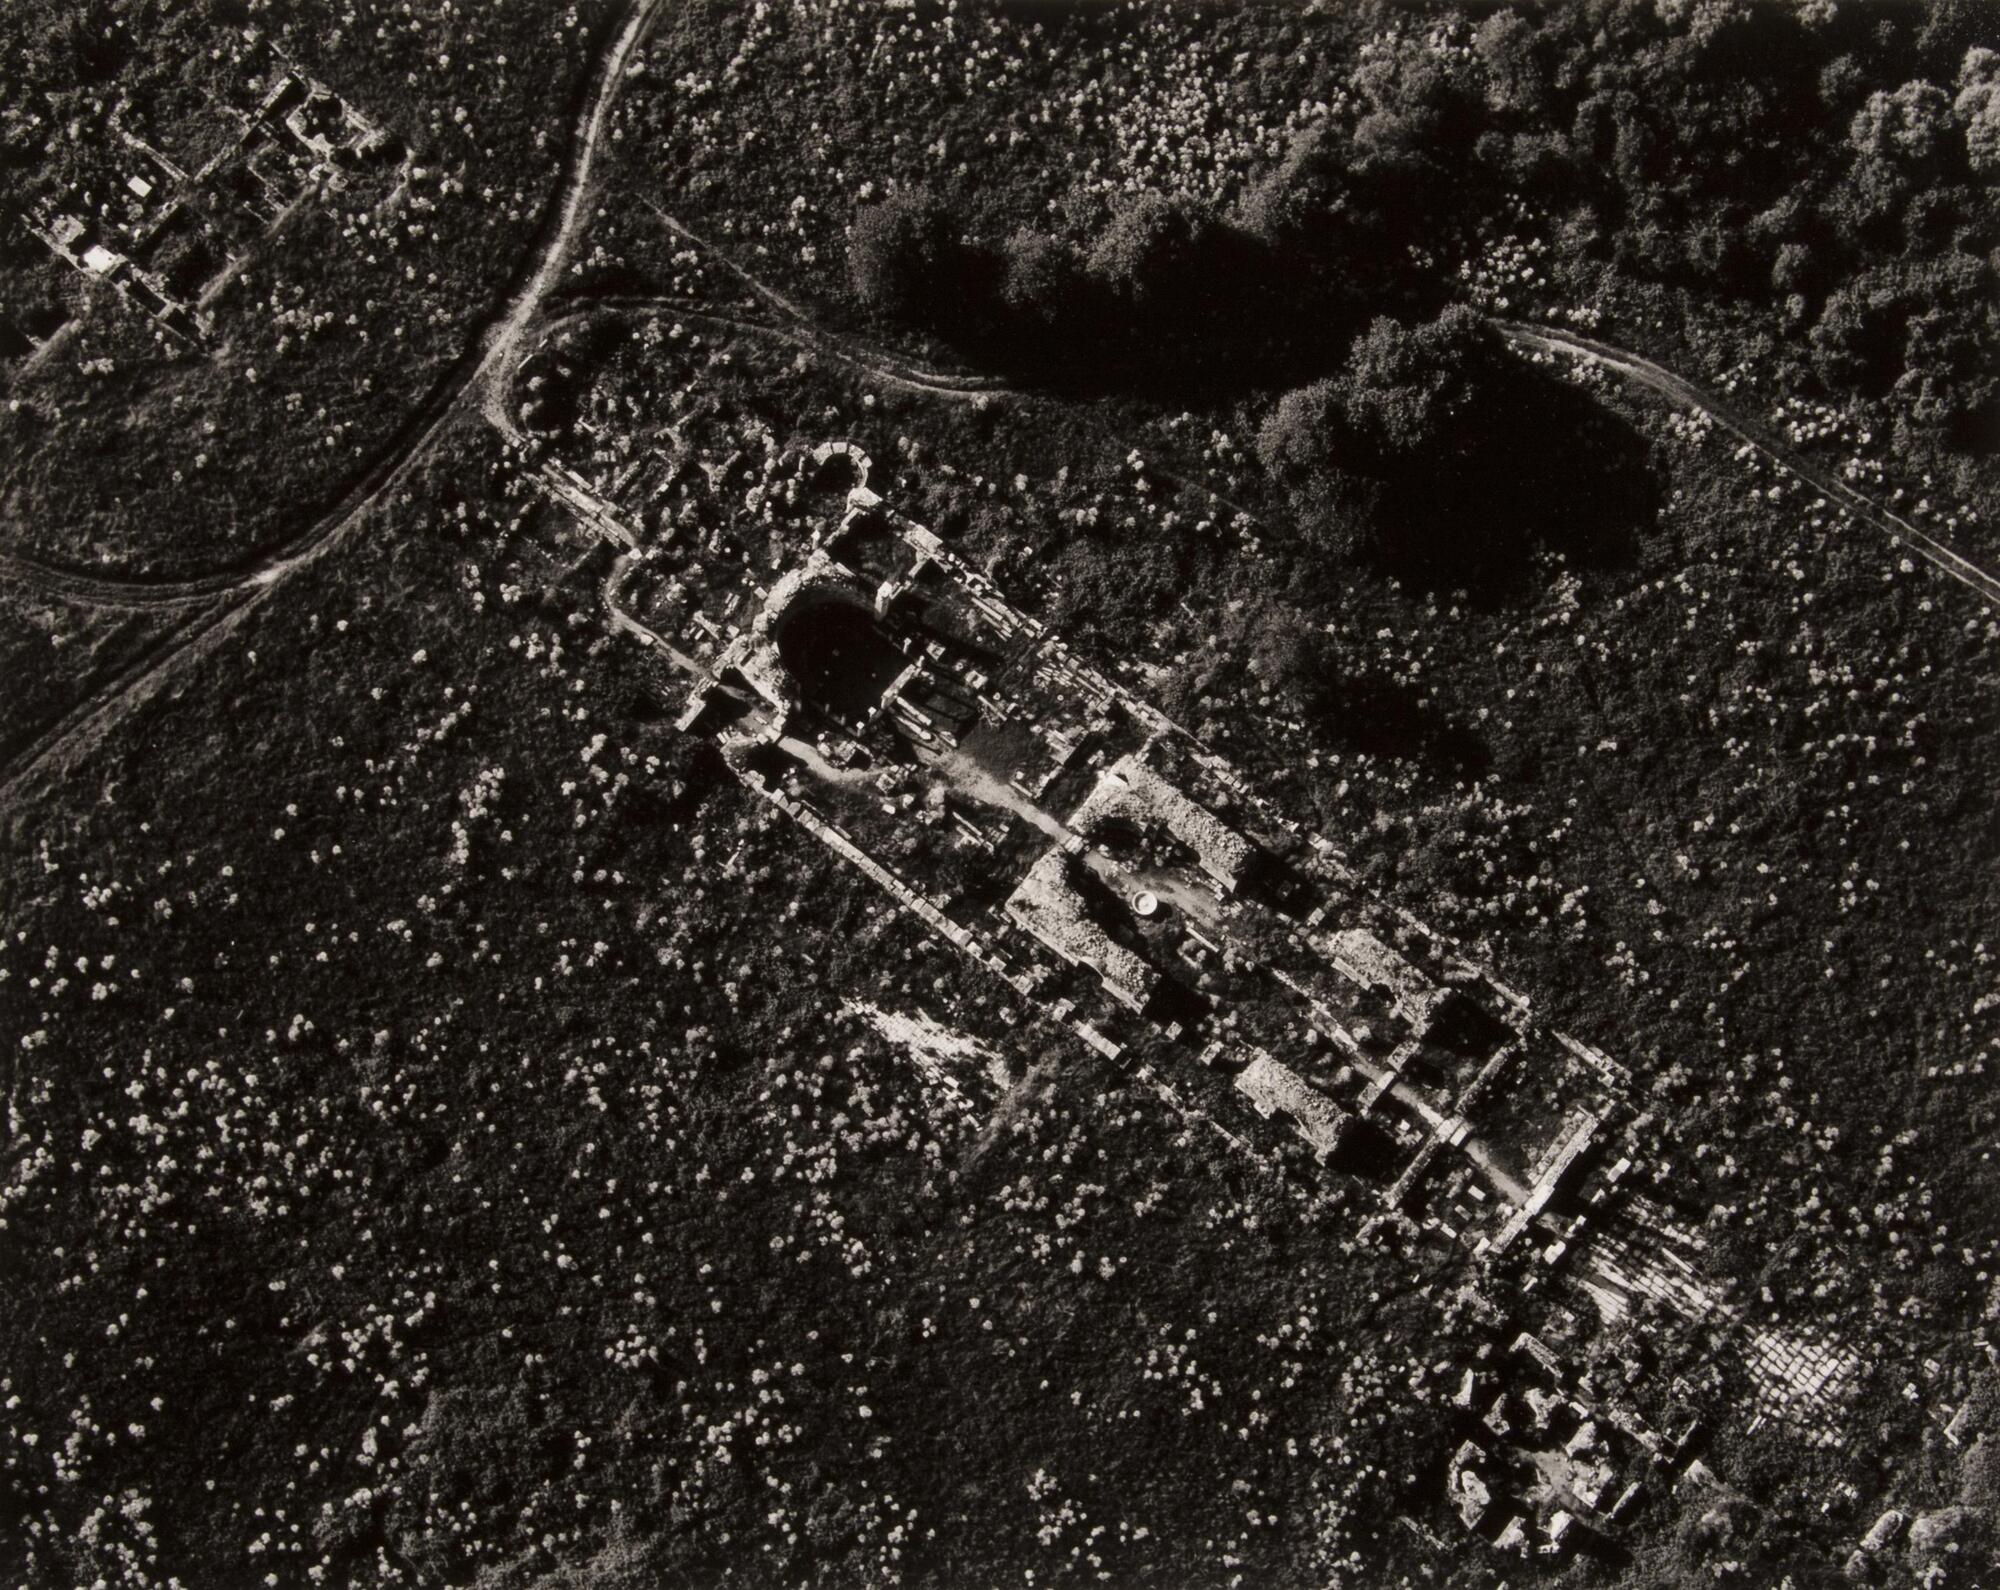 This photograph depicts an aerial view of the ruins of a church within an ancient city.